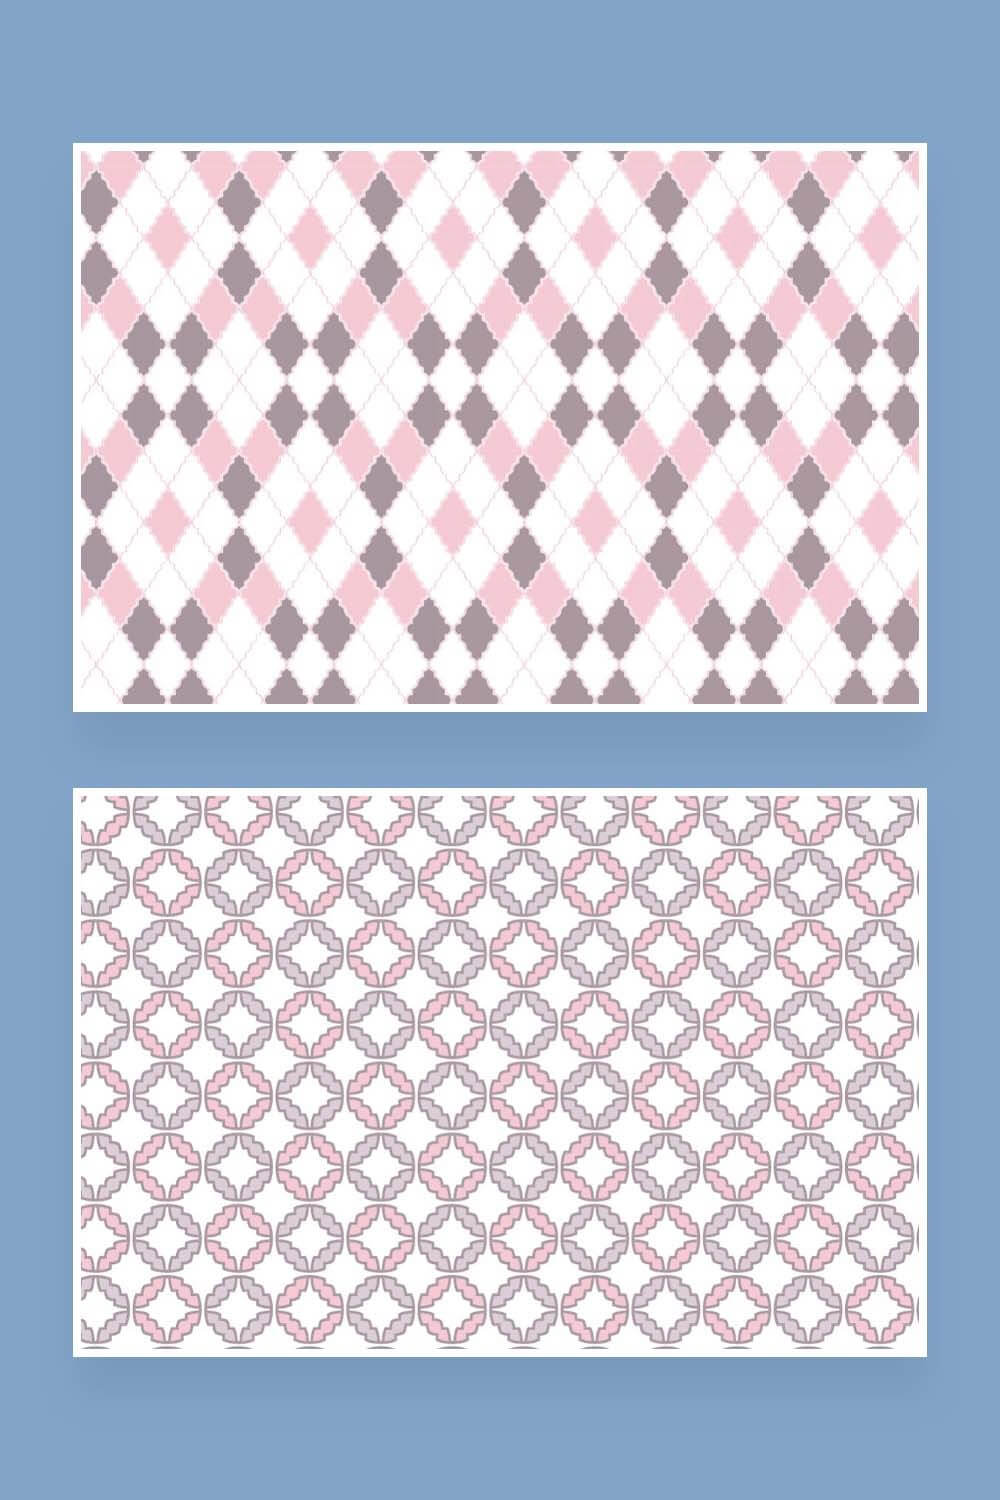 Two types of ornamental seamless patterns.